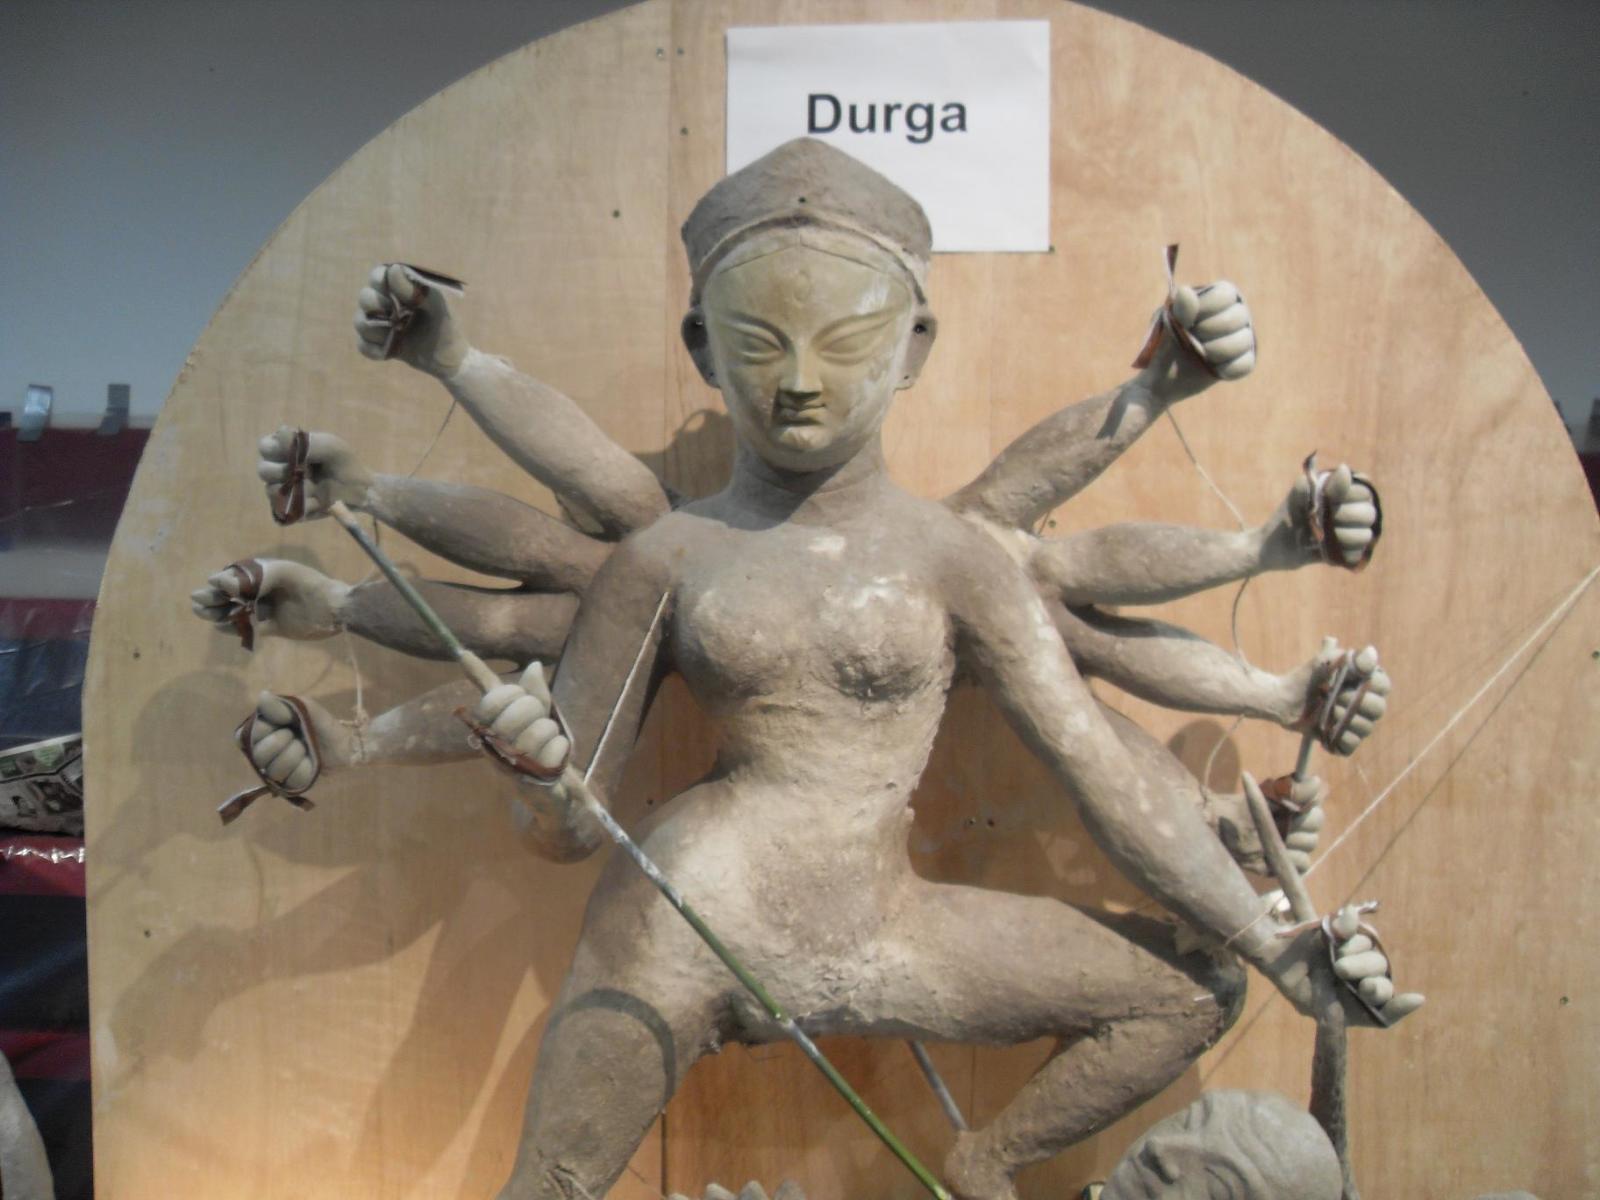 The image of the Goddess Durga drying before being painted